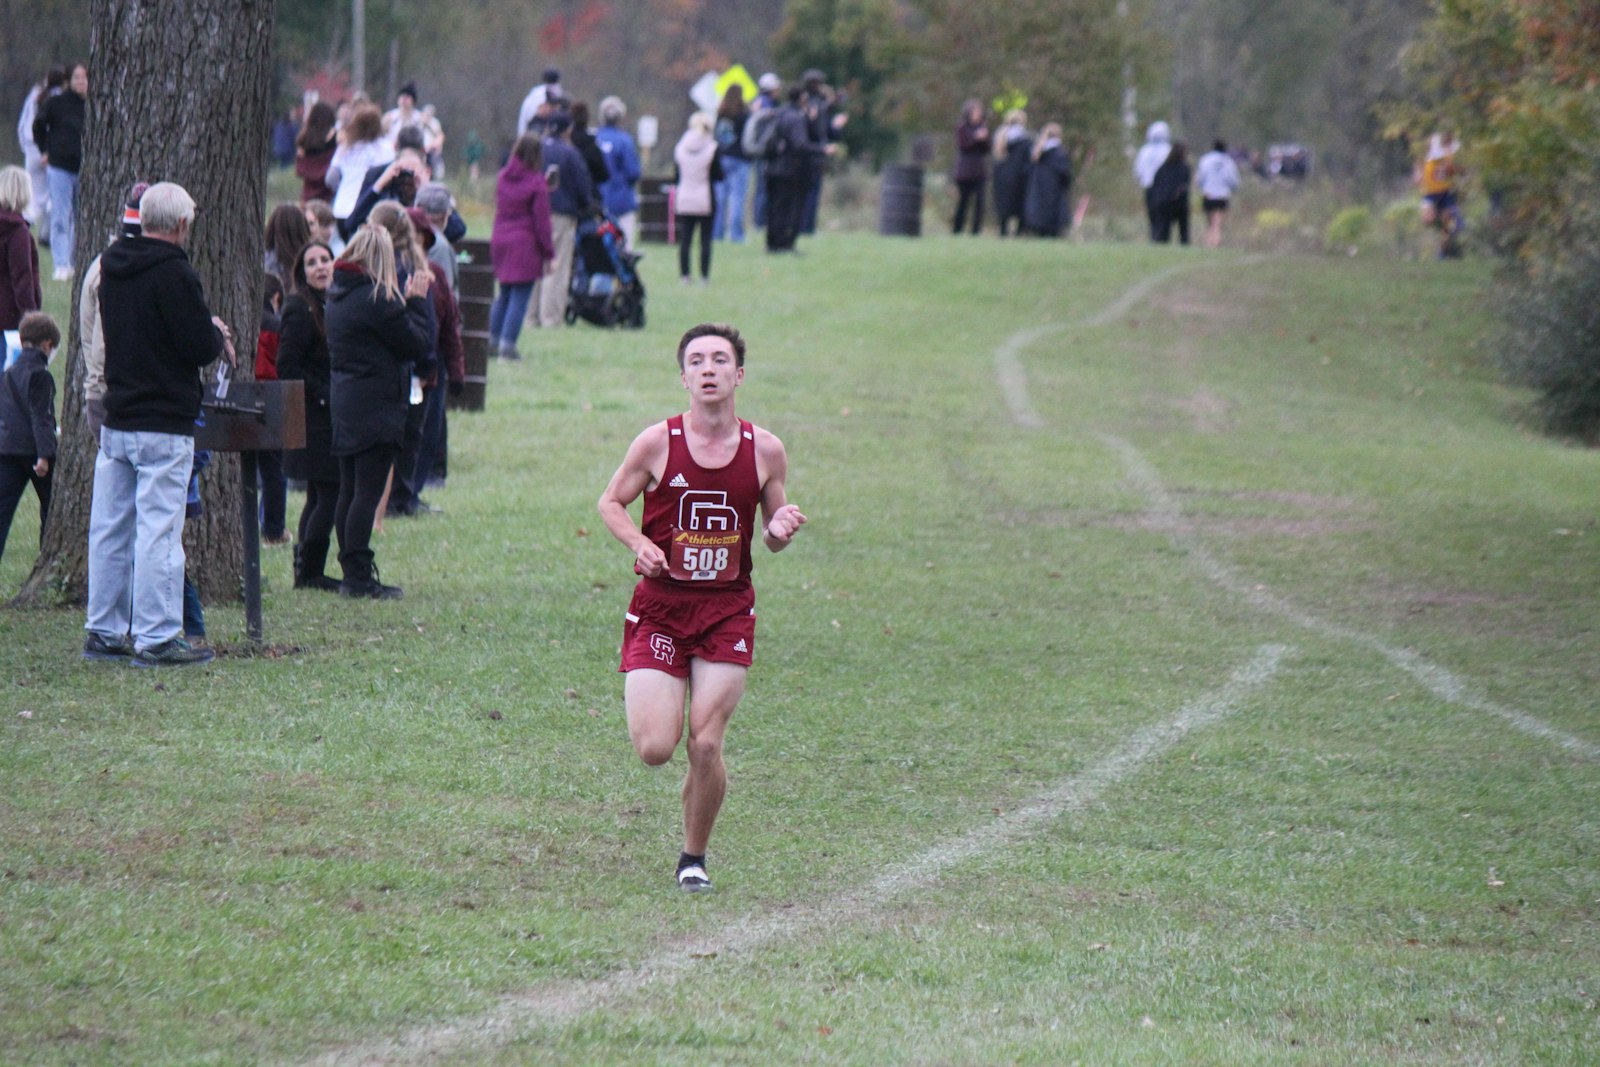 The second-place runner is barely in sight as Riverview Gabriel Richard junior Alex Meszaros cruises to the finish line.